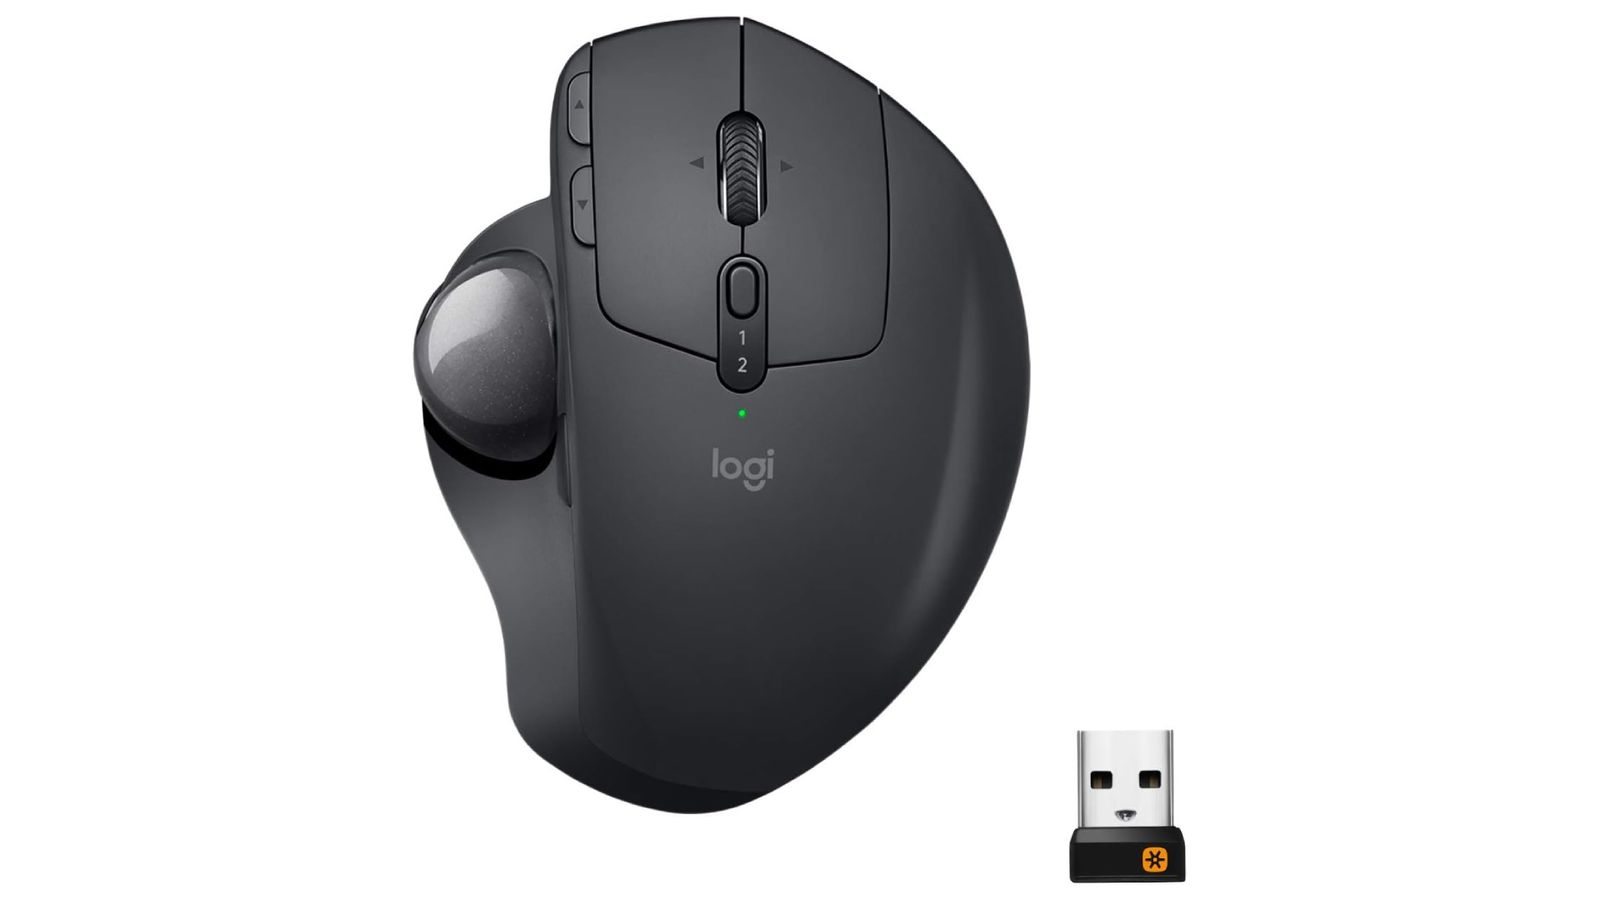 Logitech MX Ergo product image of a black mouse with a trackball on the left side.